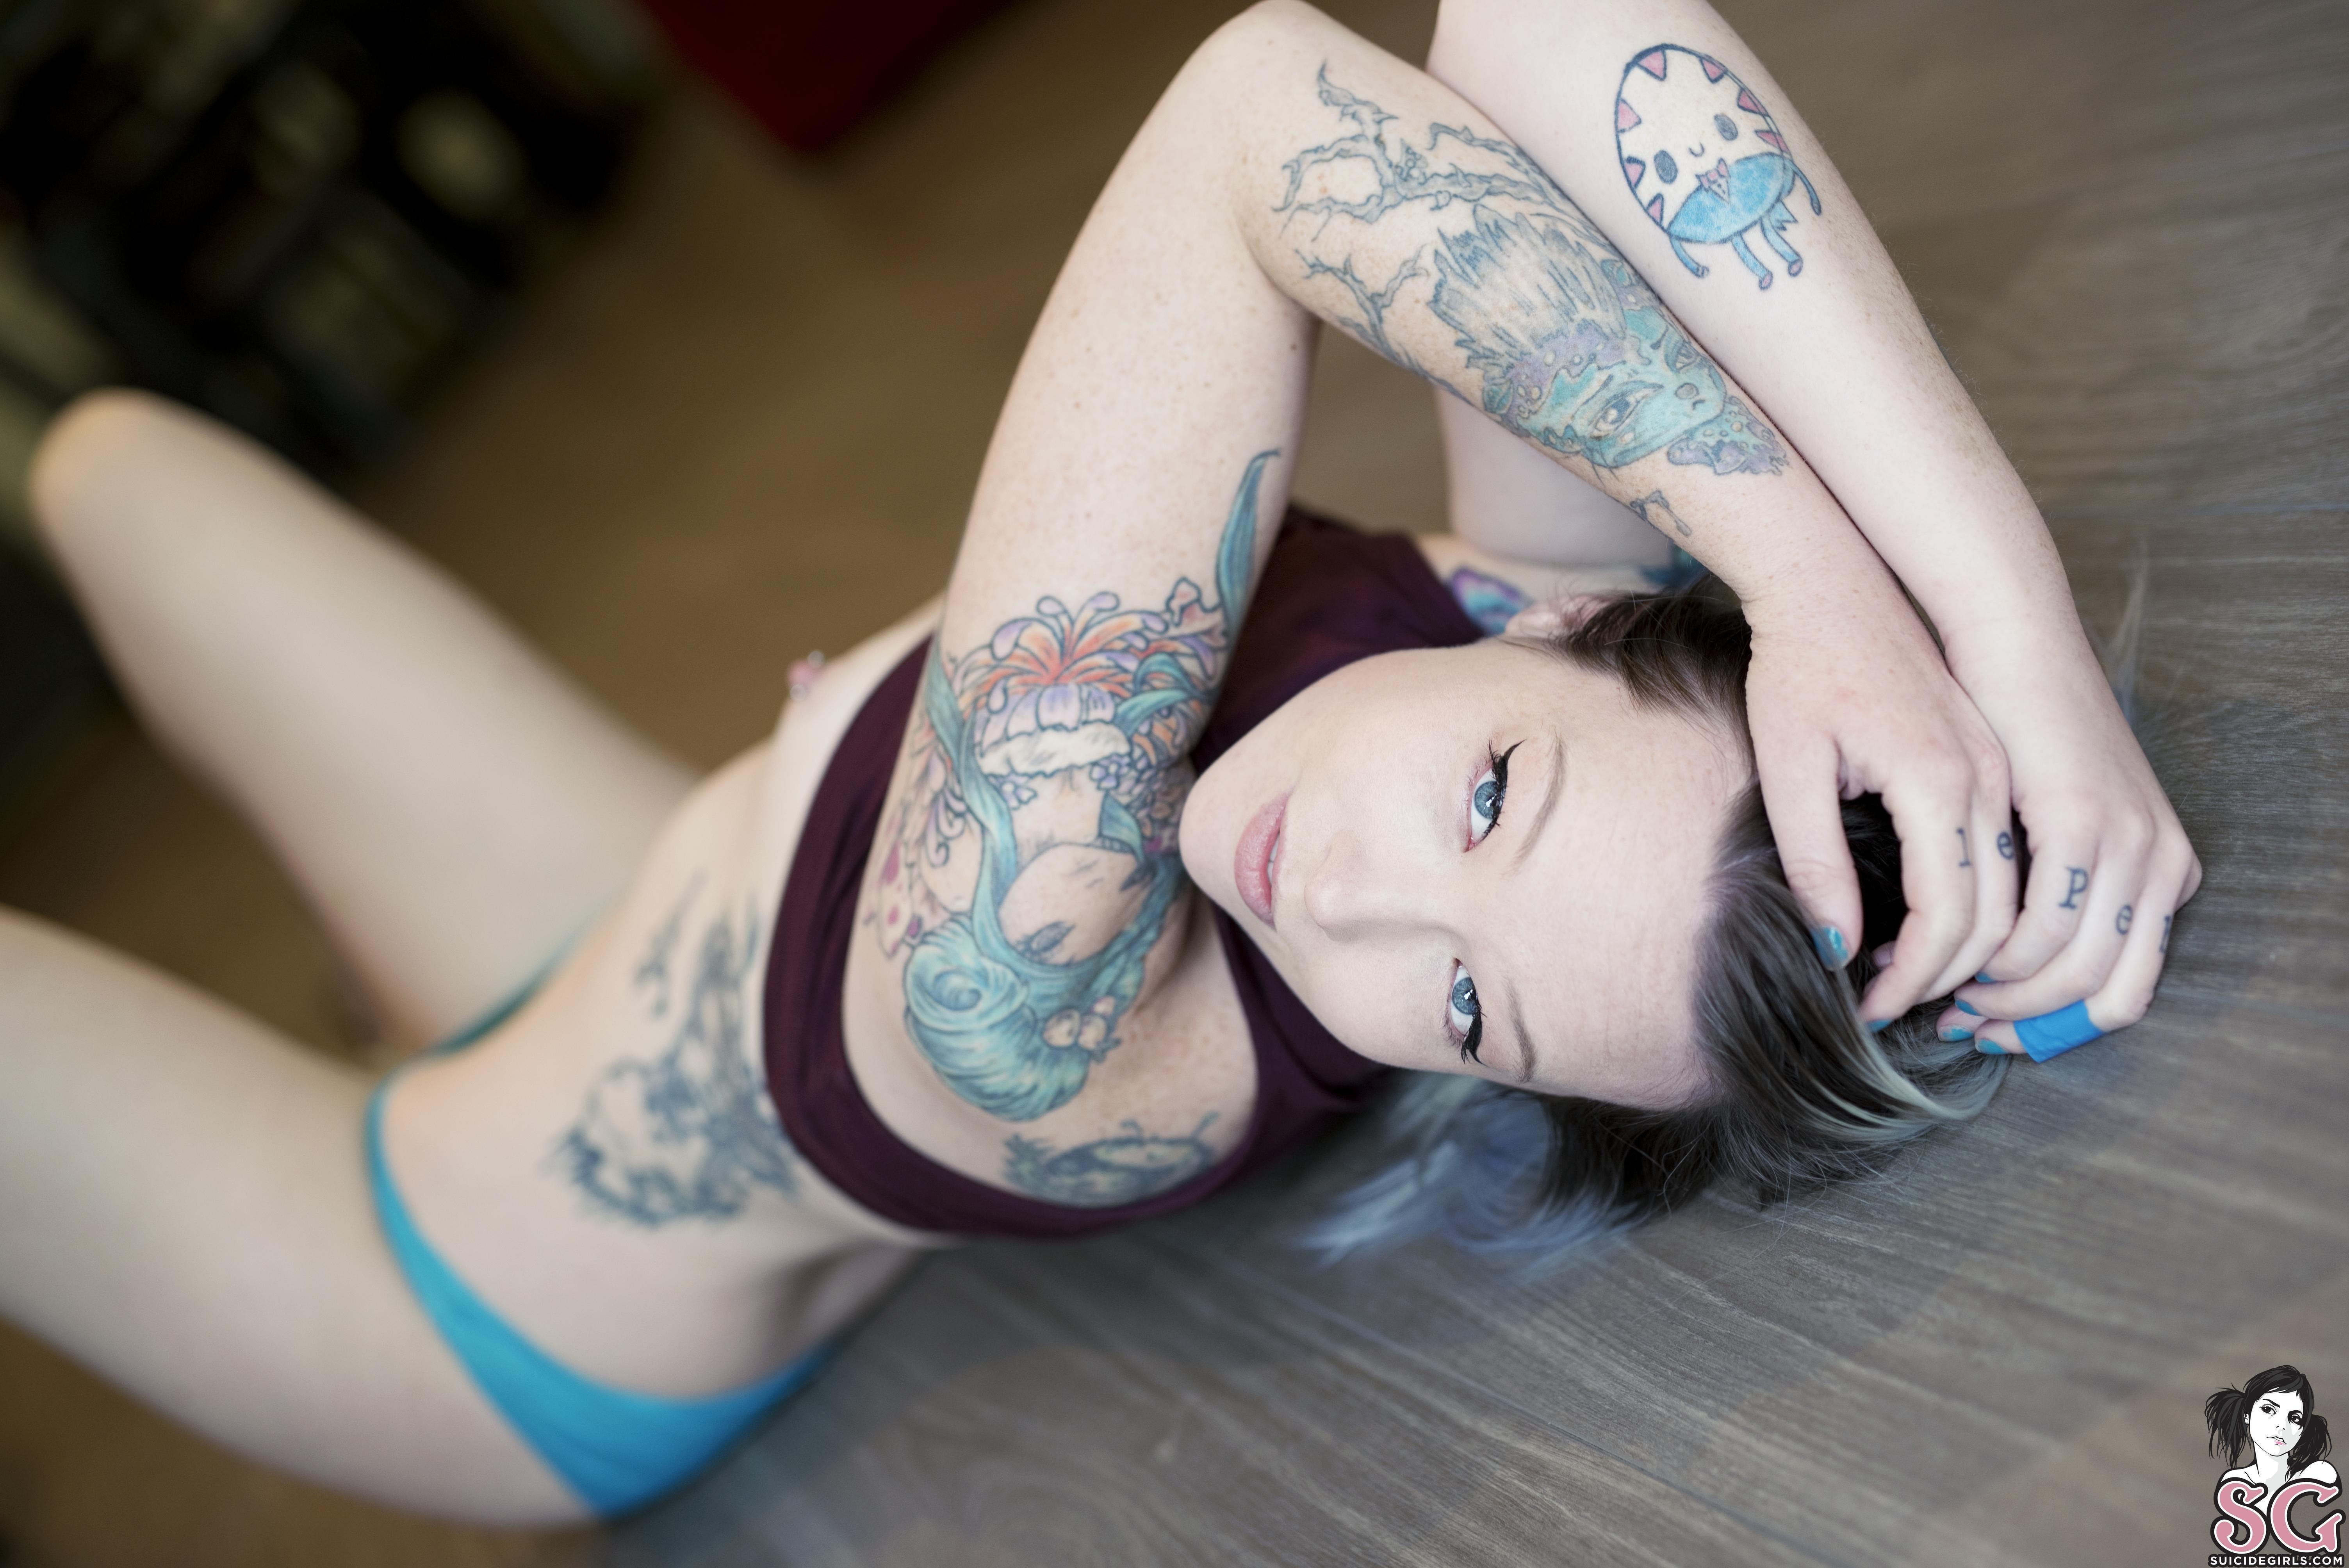 Gorgeous Suicide Girl Pebblezink Moe 18 HD high quality lossless image.